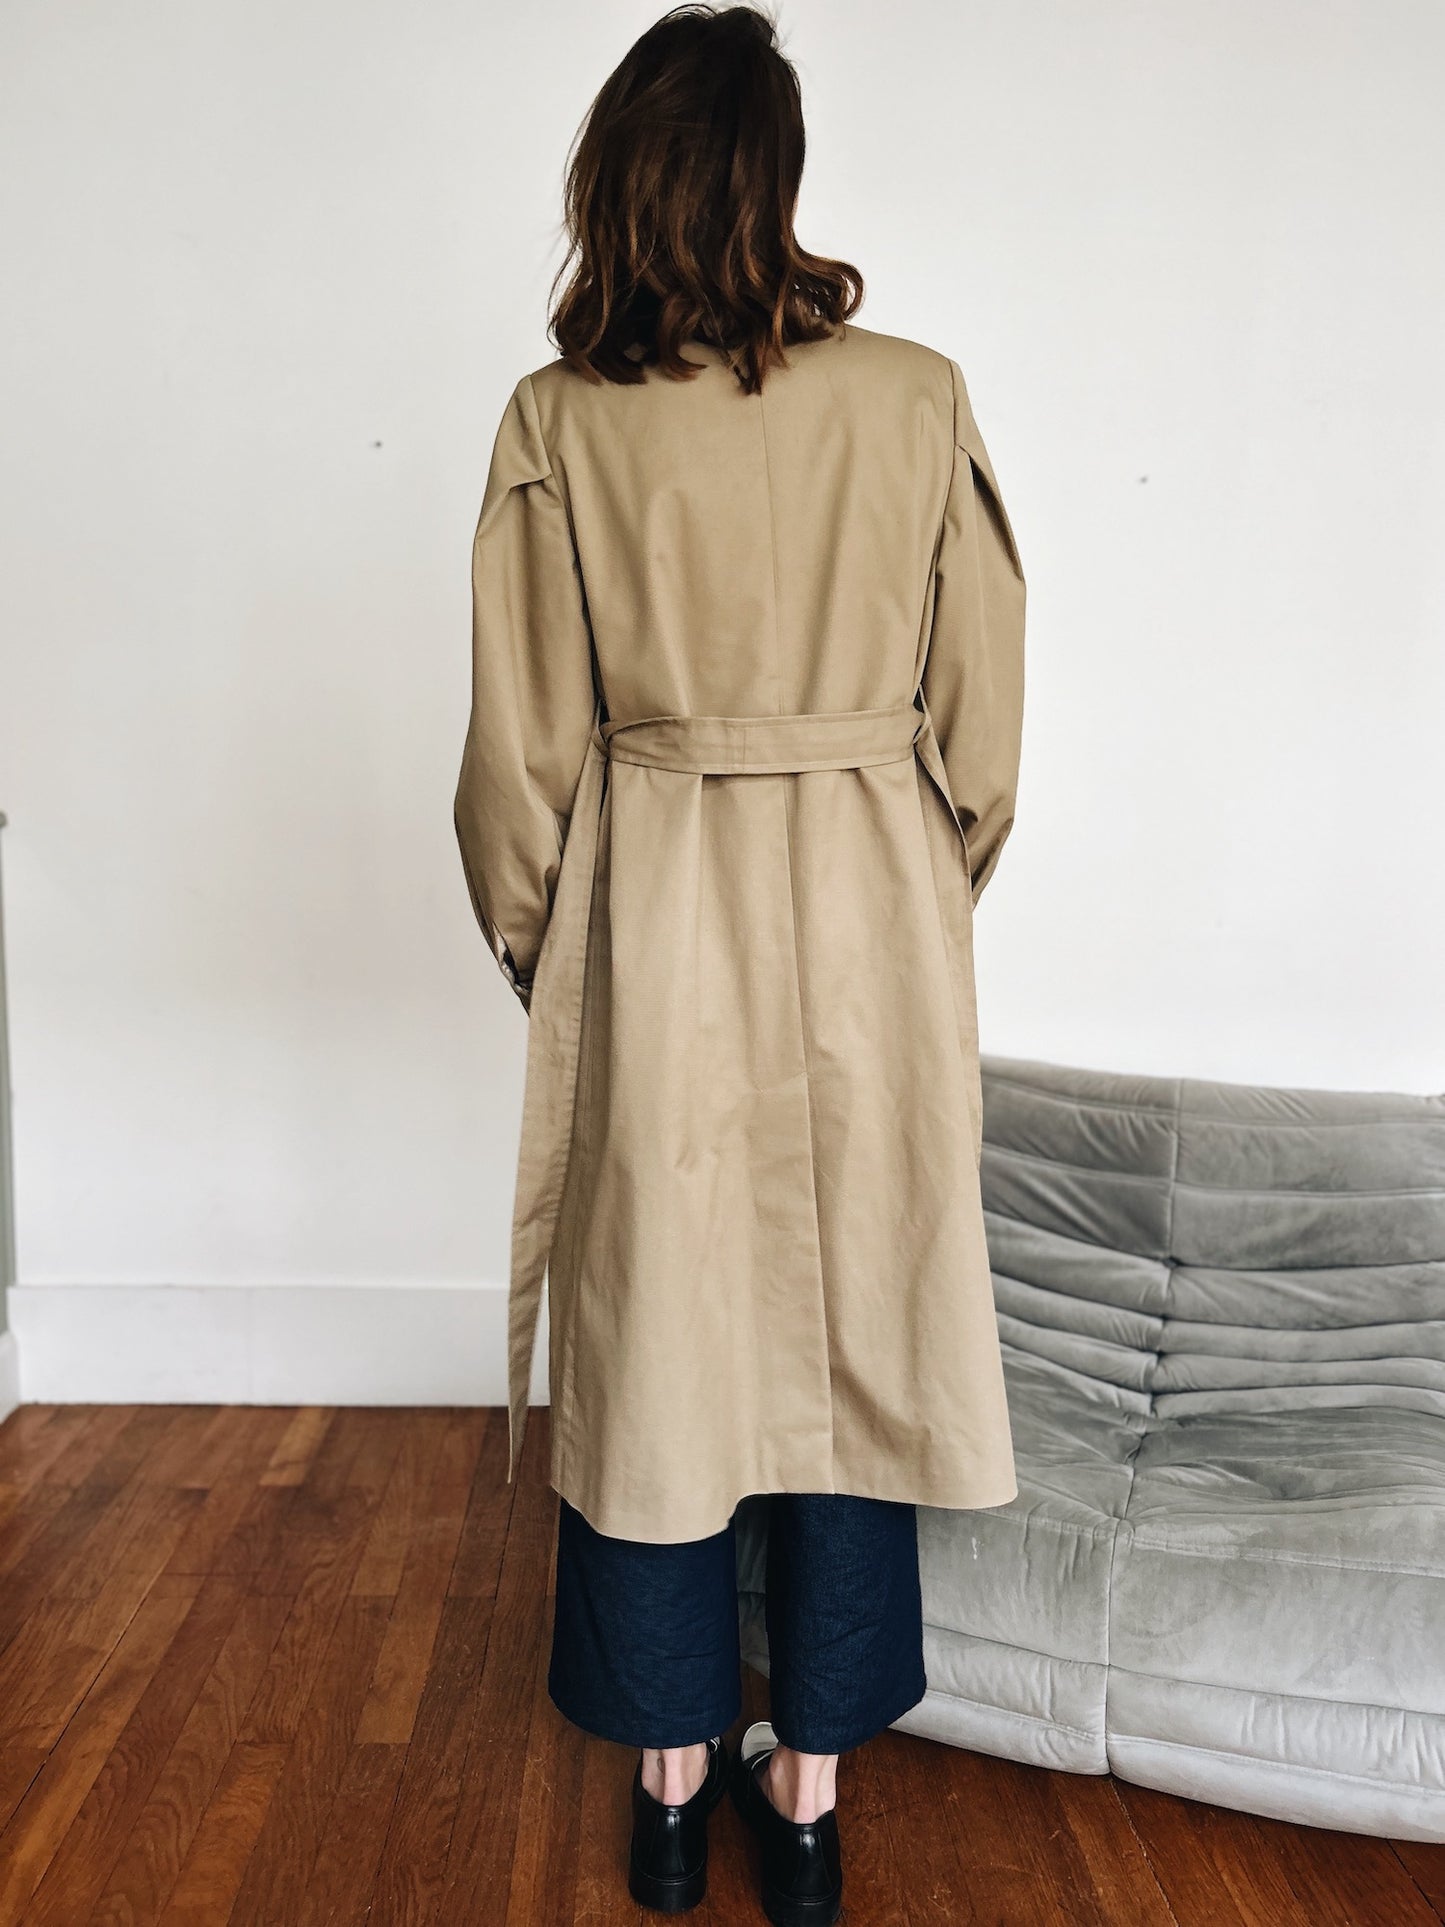 Will trench coat